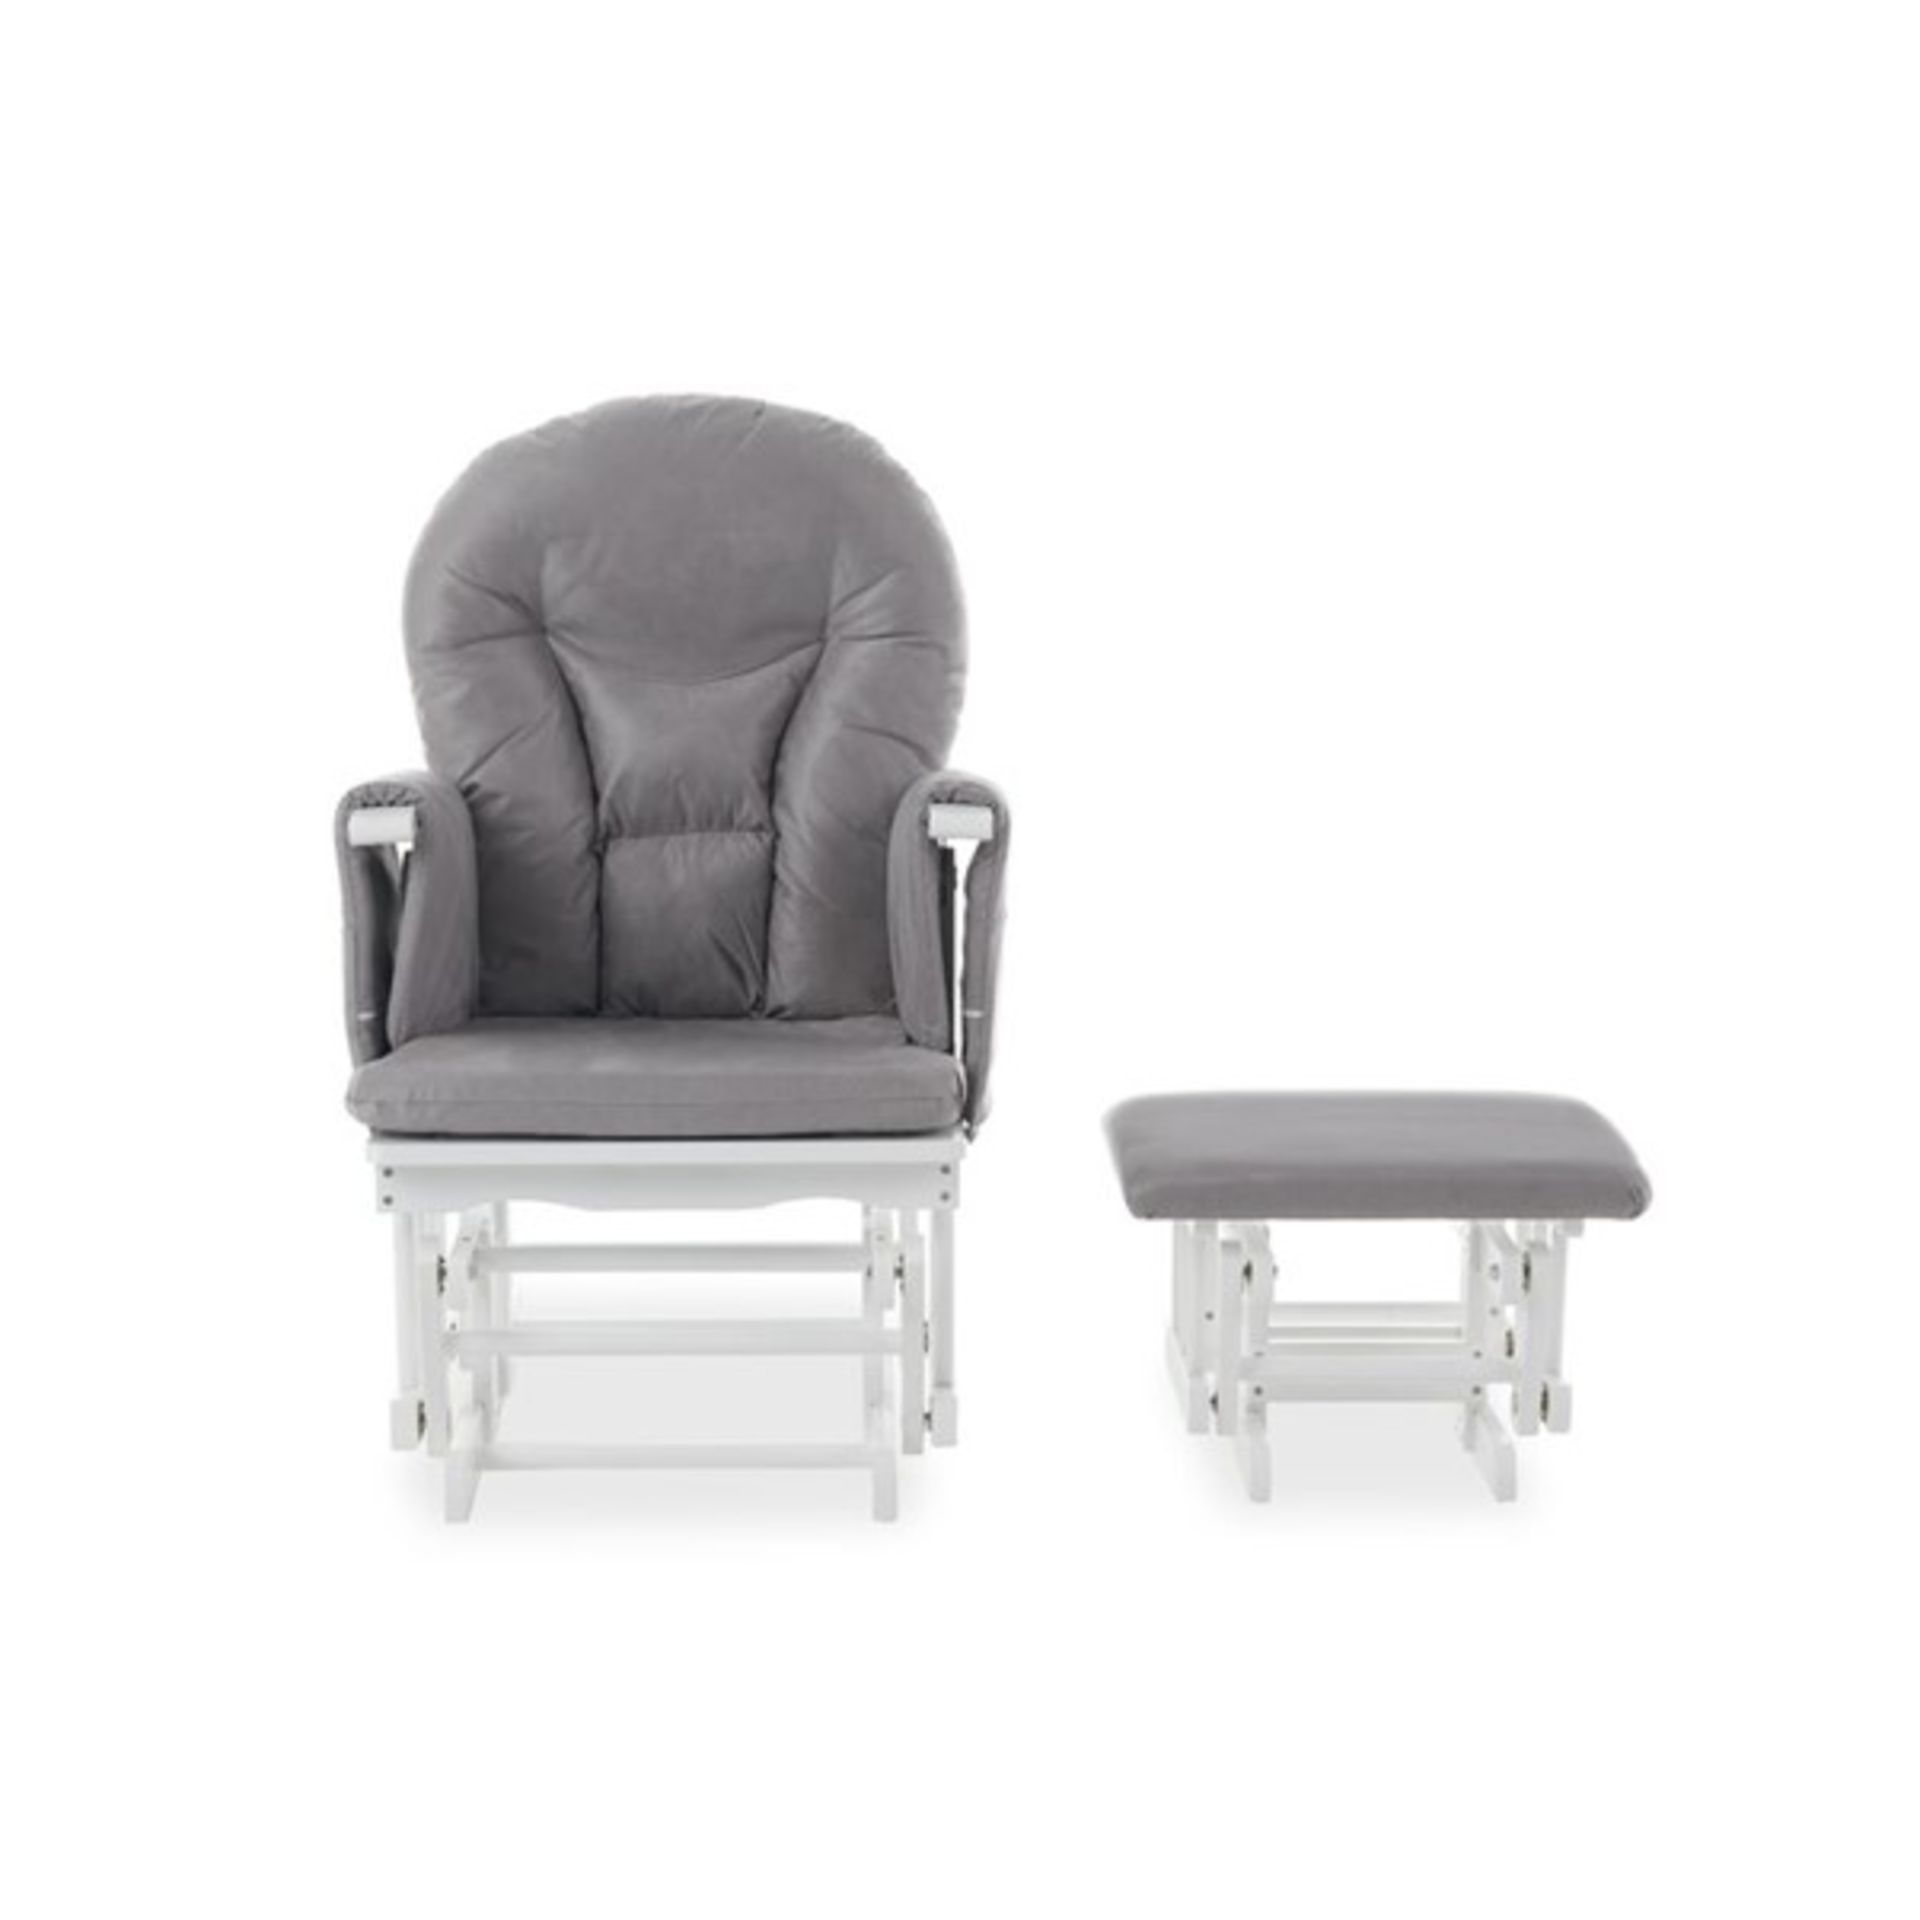 RRP £240 - Reclining Glider Nursing Chair and Footrest - SEAT 43cm H x 45cm W x 47cm D - Image 2 of 3